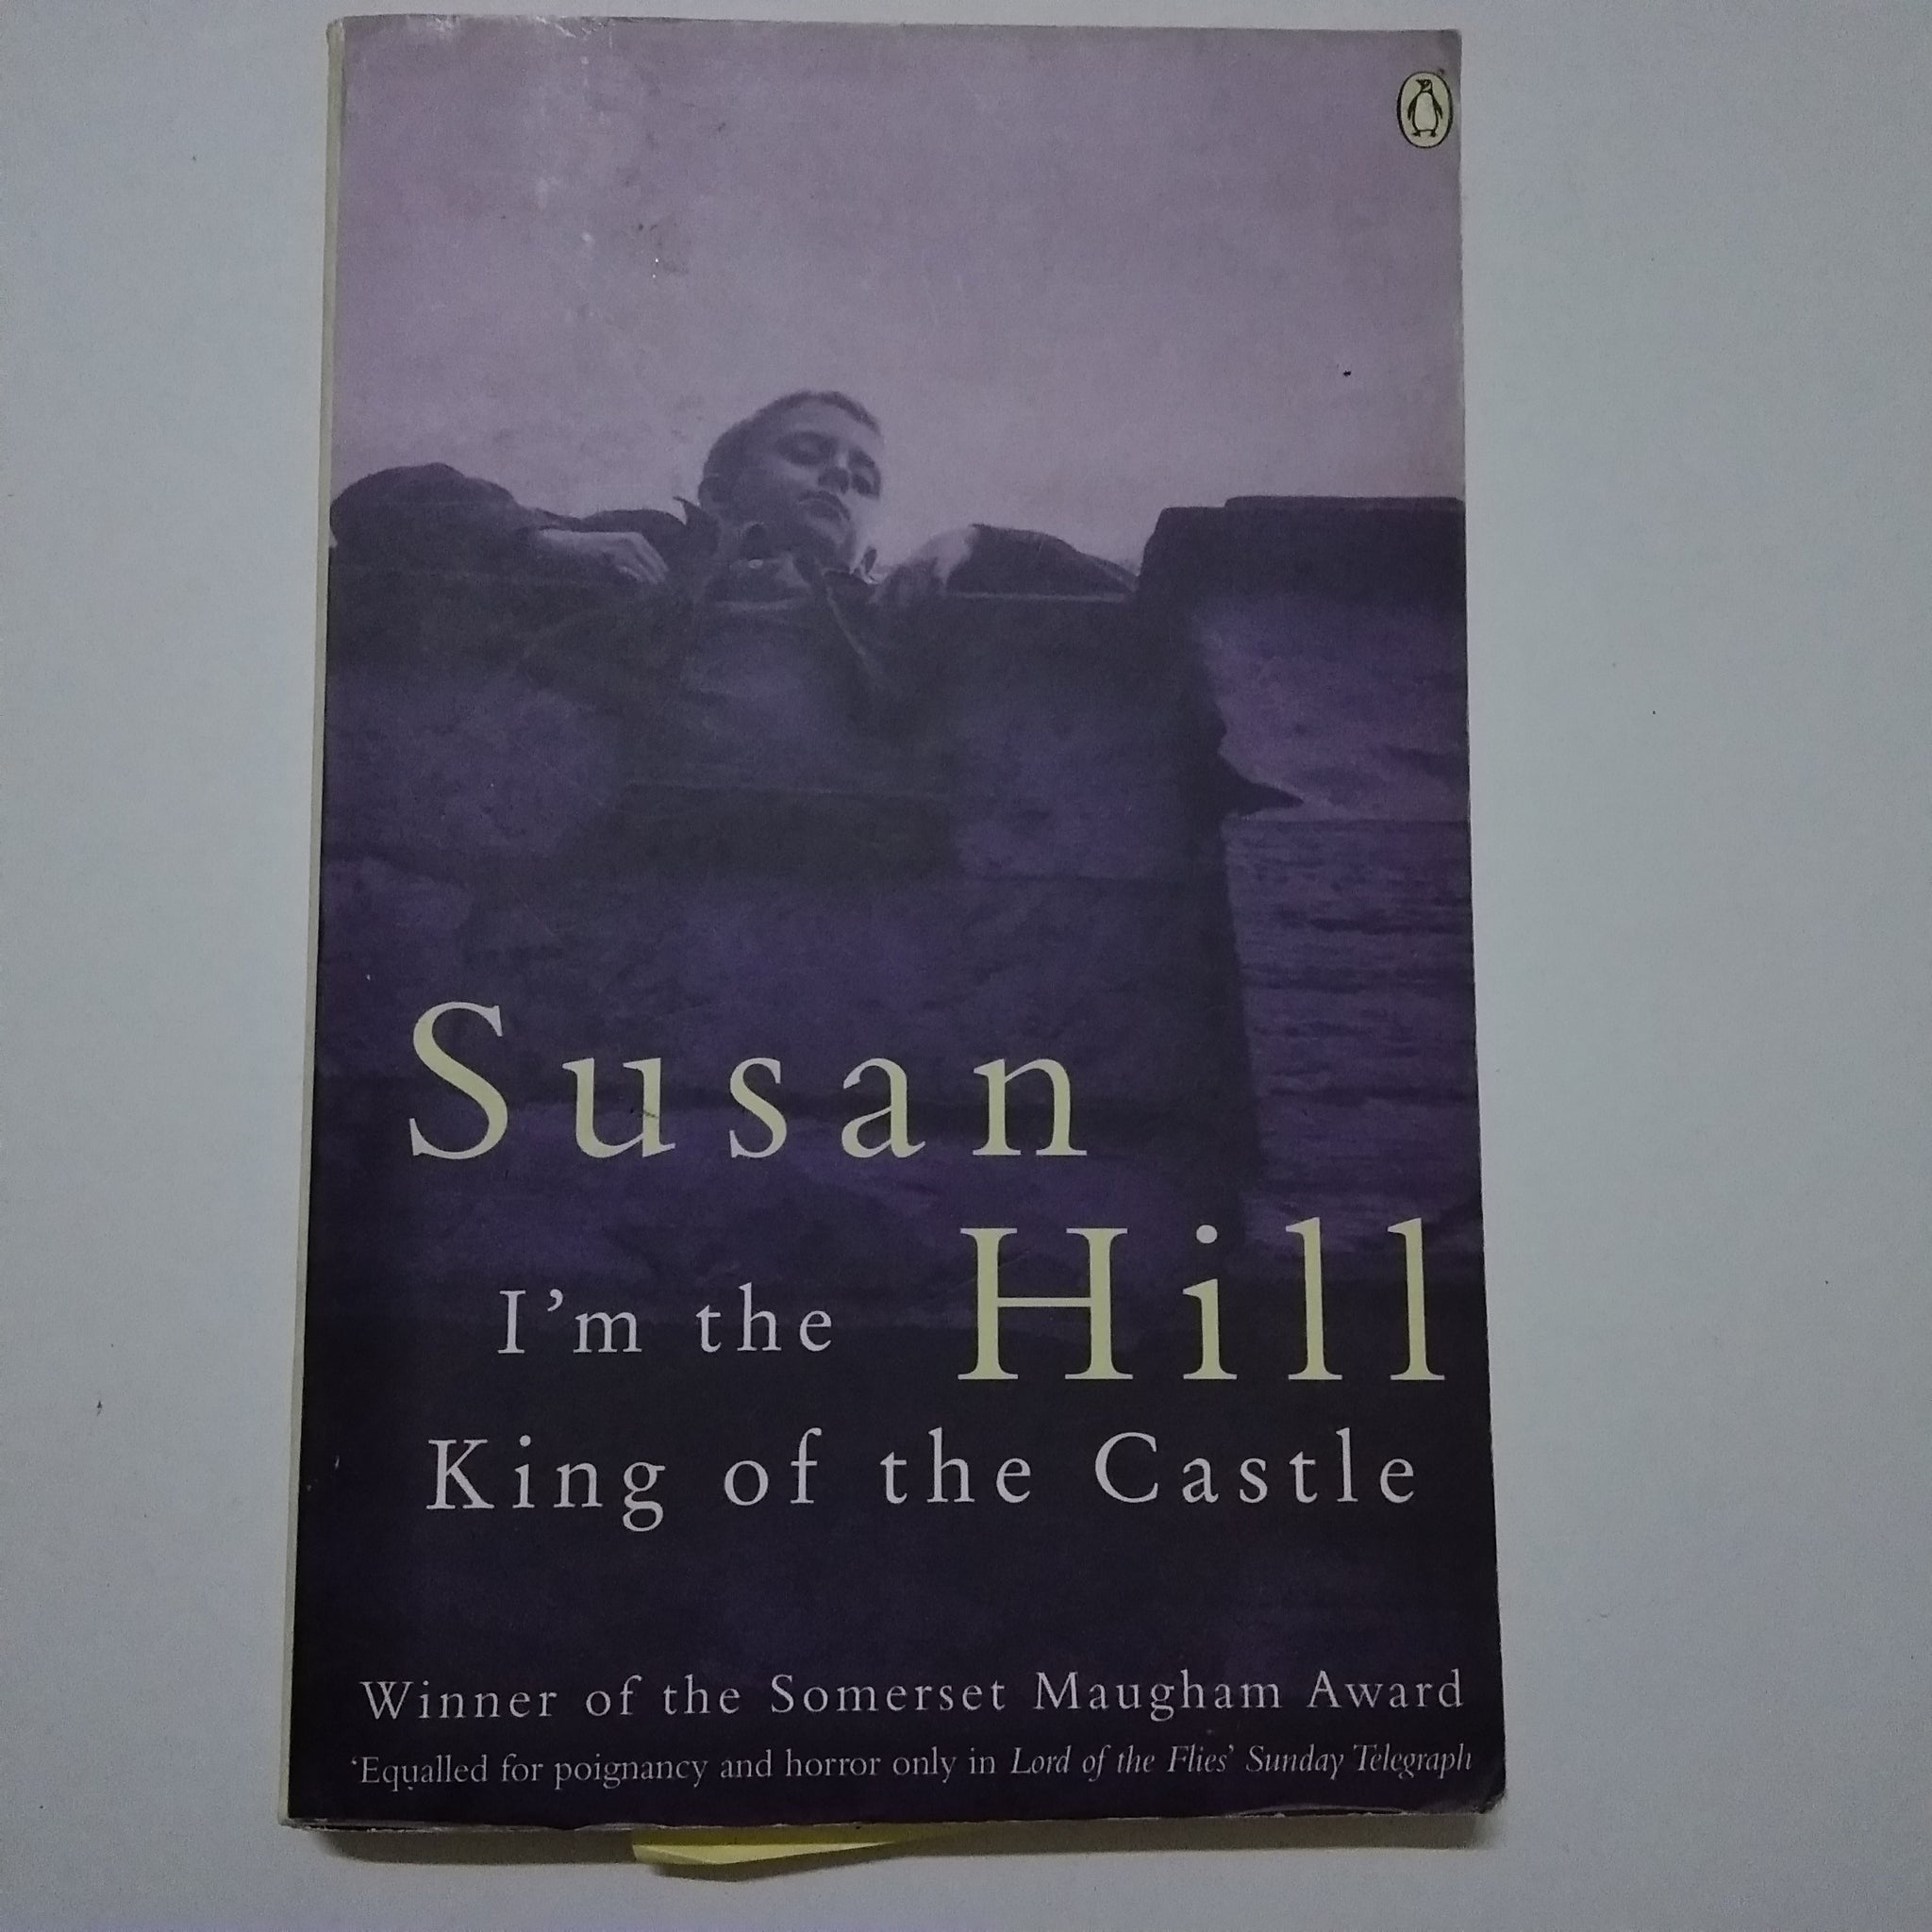 I'm the King of the Castle, Susan Hill, Paperback